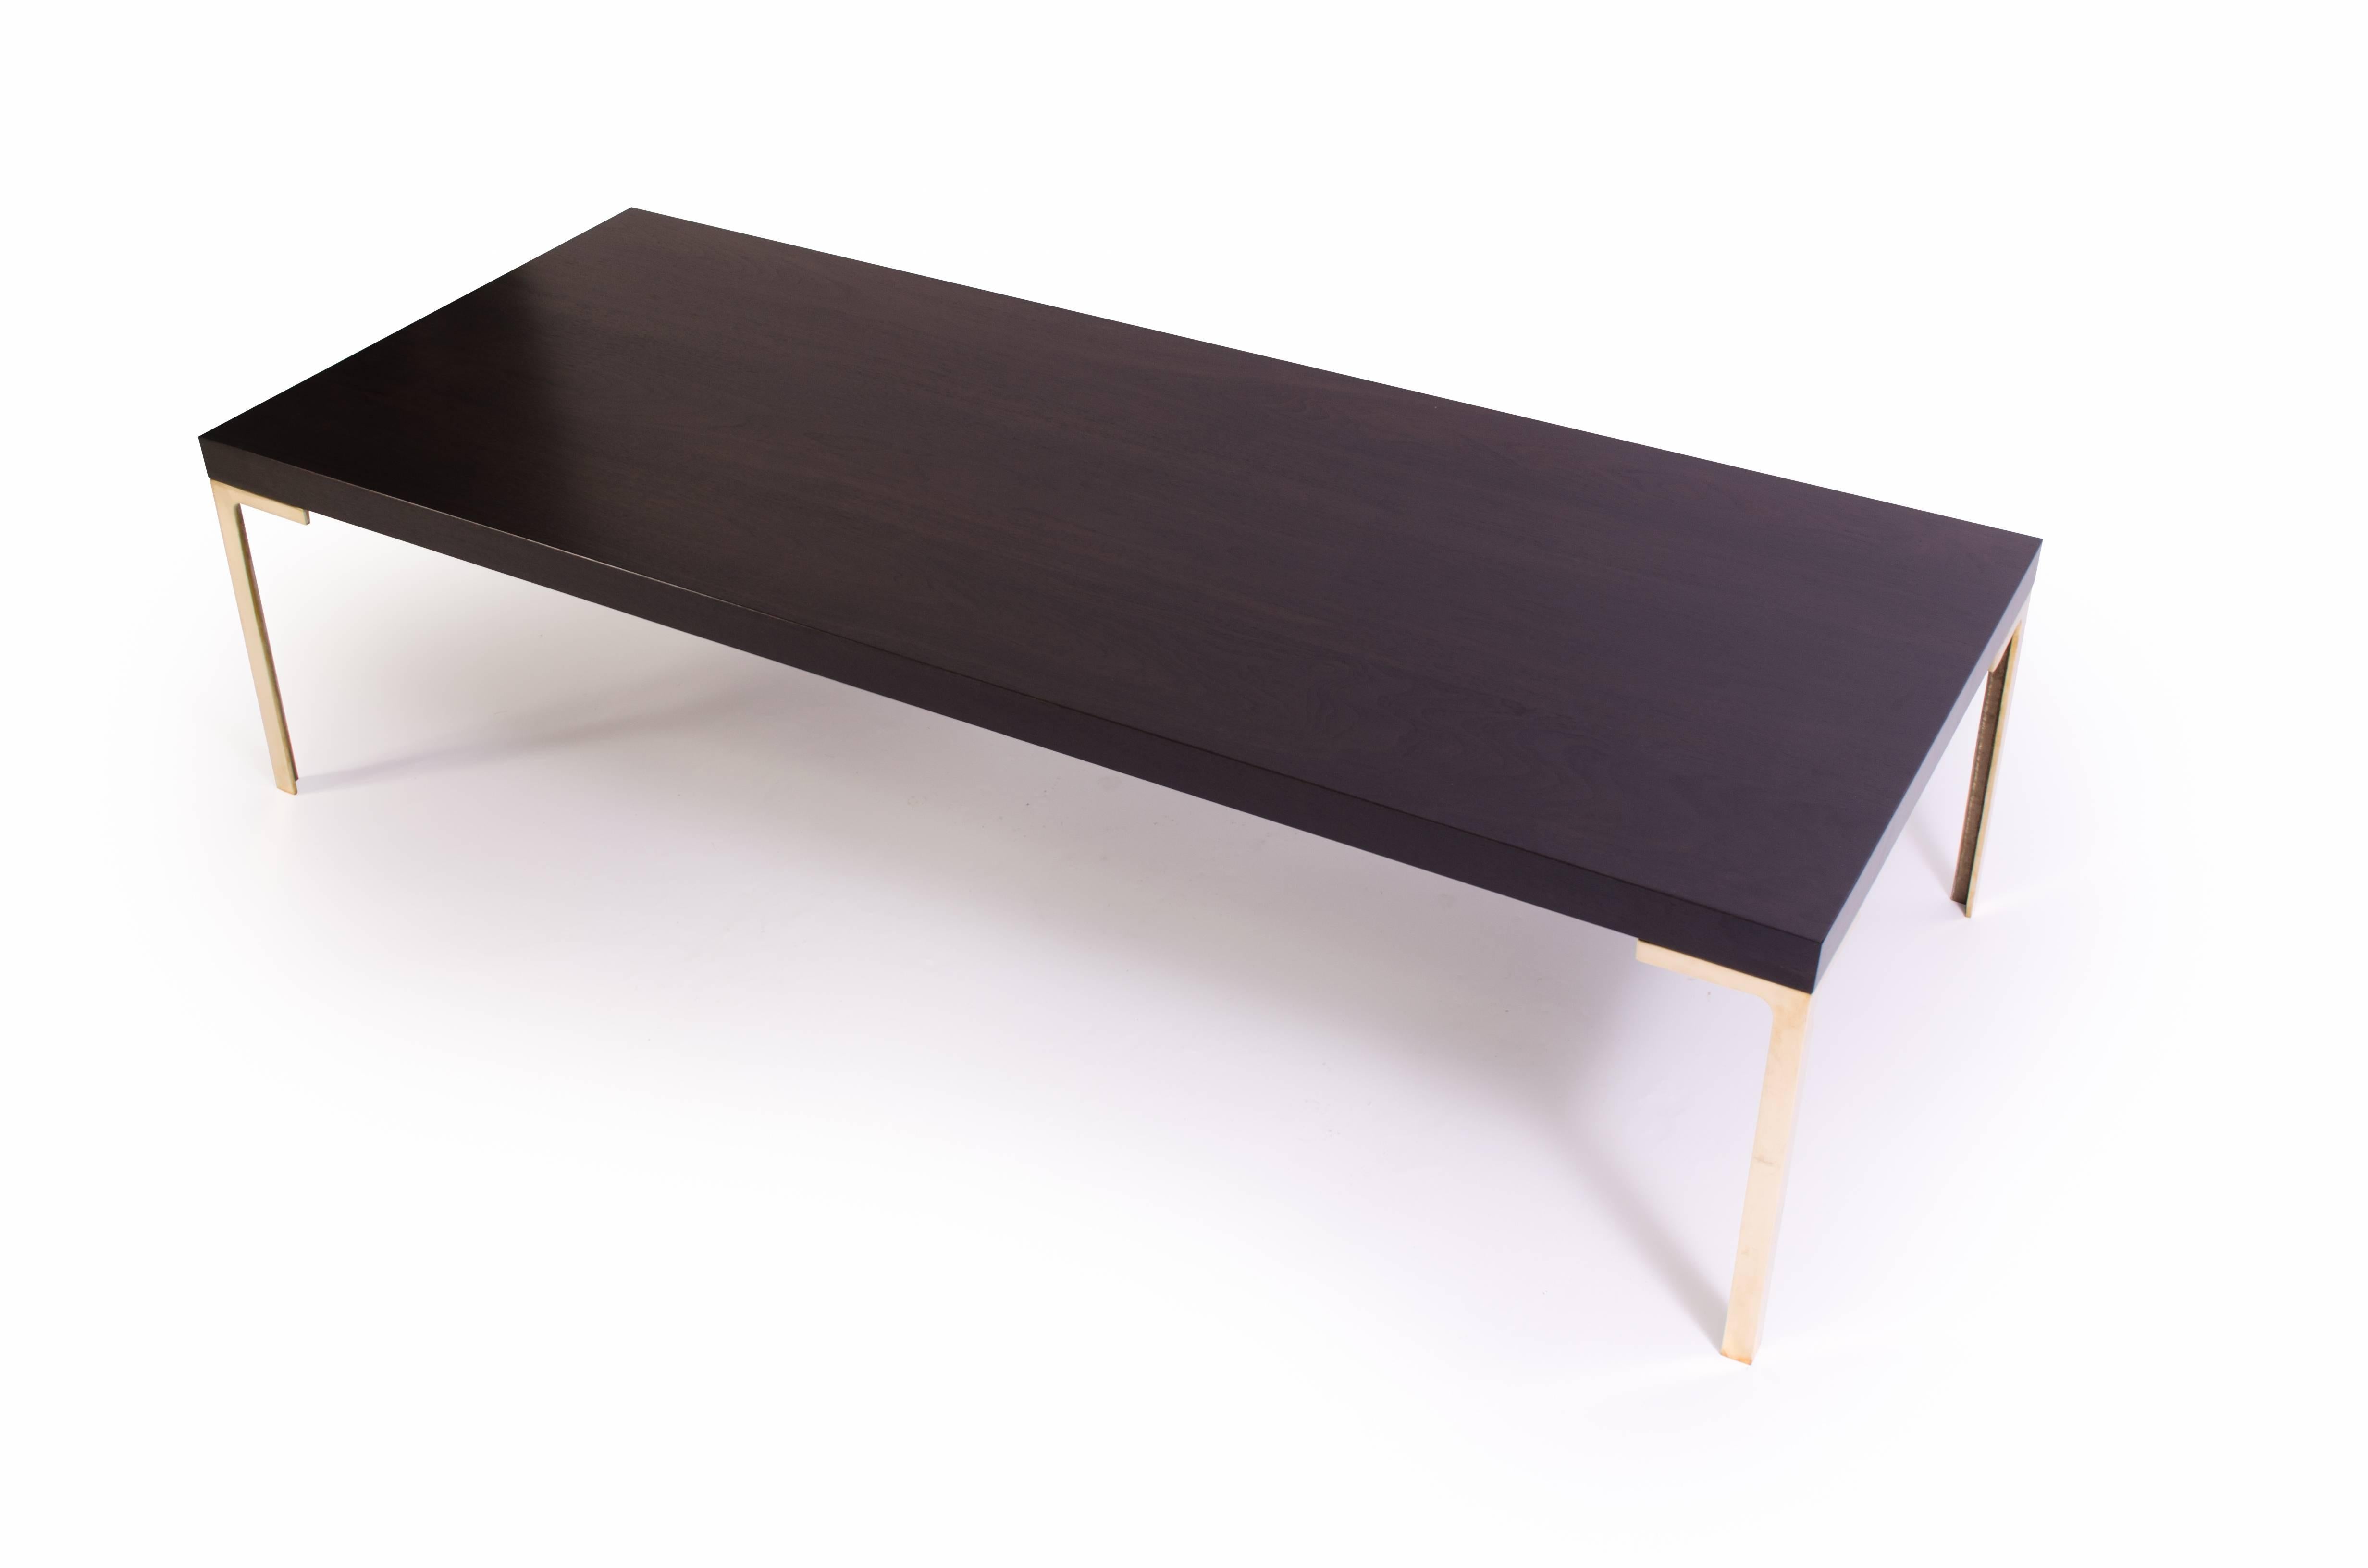 A stunning creation by Montage, the Astor cocktail table. This piece was designed with the Mid-Century in mind embodying delicate proportions and bold use of the highest quality materials. 

The table is topped with solid ebonized walnut, the